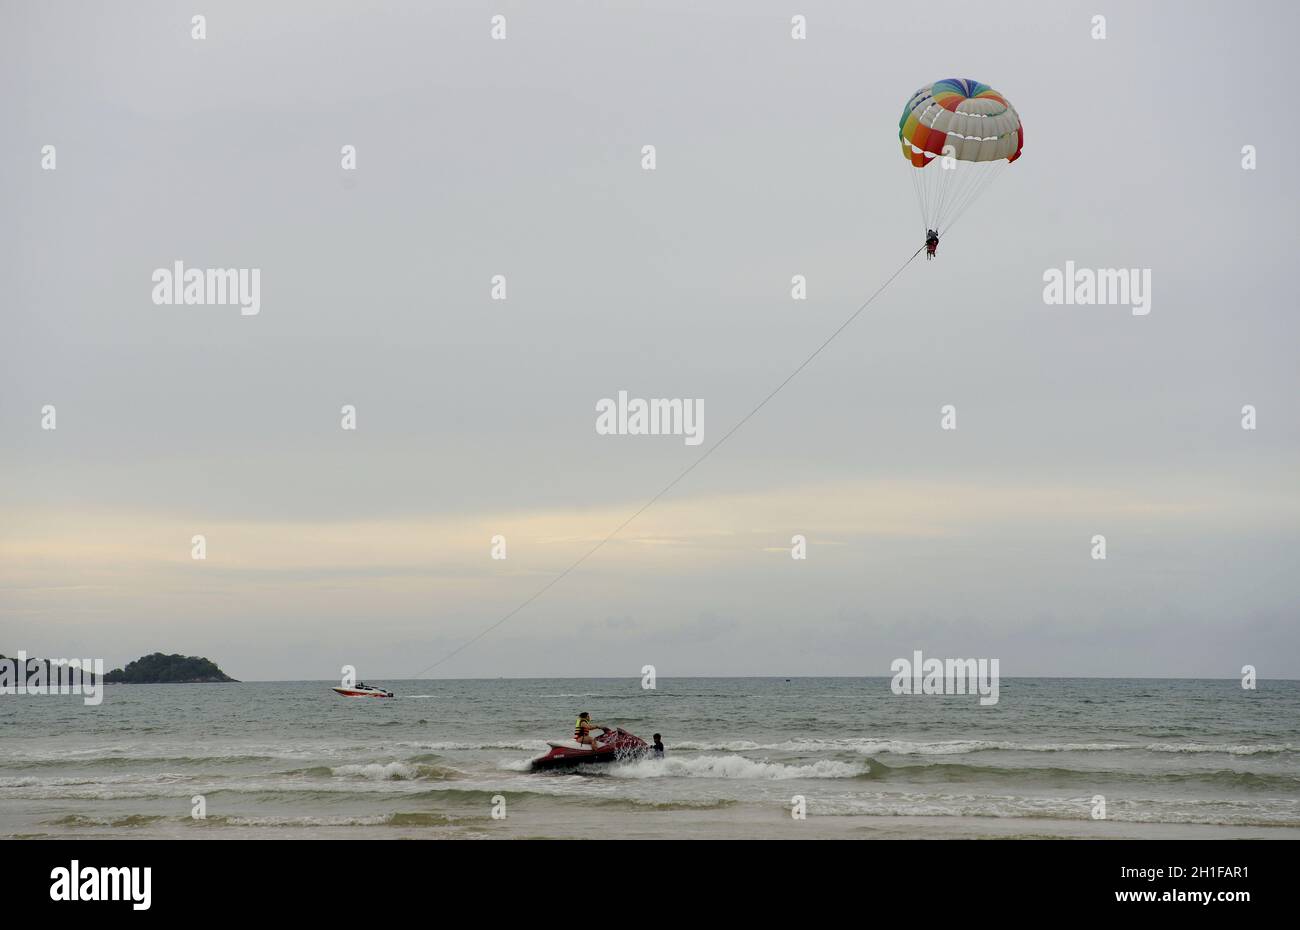 Parasailing on Patong Beach. Thailand’s Phuket Island has a 7 day quarantine period for vaccinated foreign tourists and locals, called the Phuket Sandbox. After a successful negative PCR test visitors are permitted to travel around the island during their quarantine. Thailand will allow fully vaccinated visitors from low-risk countries to enter the kingdom without quarantine from November 1 as a key effort by the government to boost the economy. (Photo by Paul Lakatos / SOPA Images/Sipa USA) Stock Photo